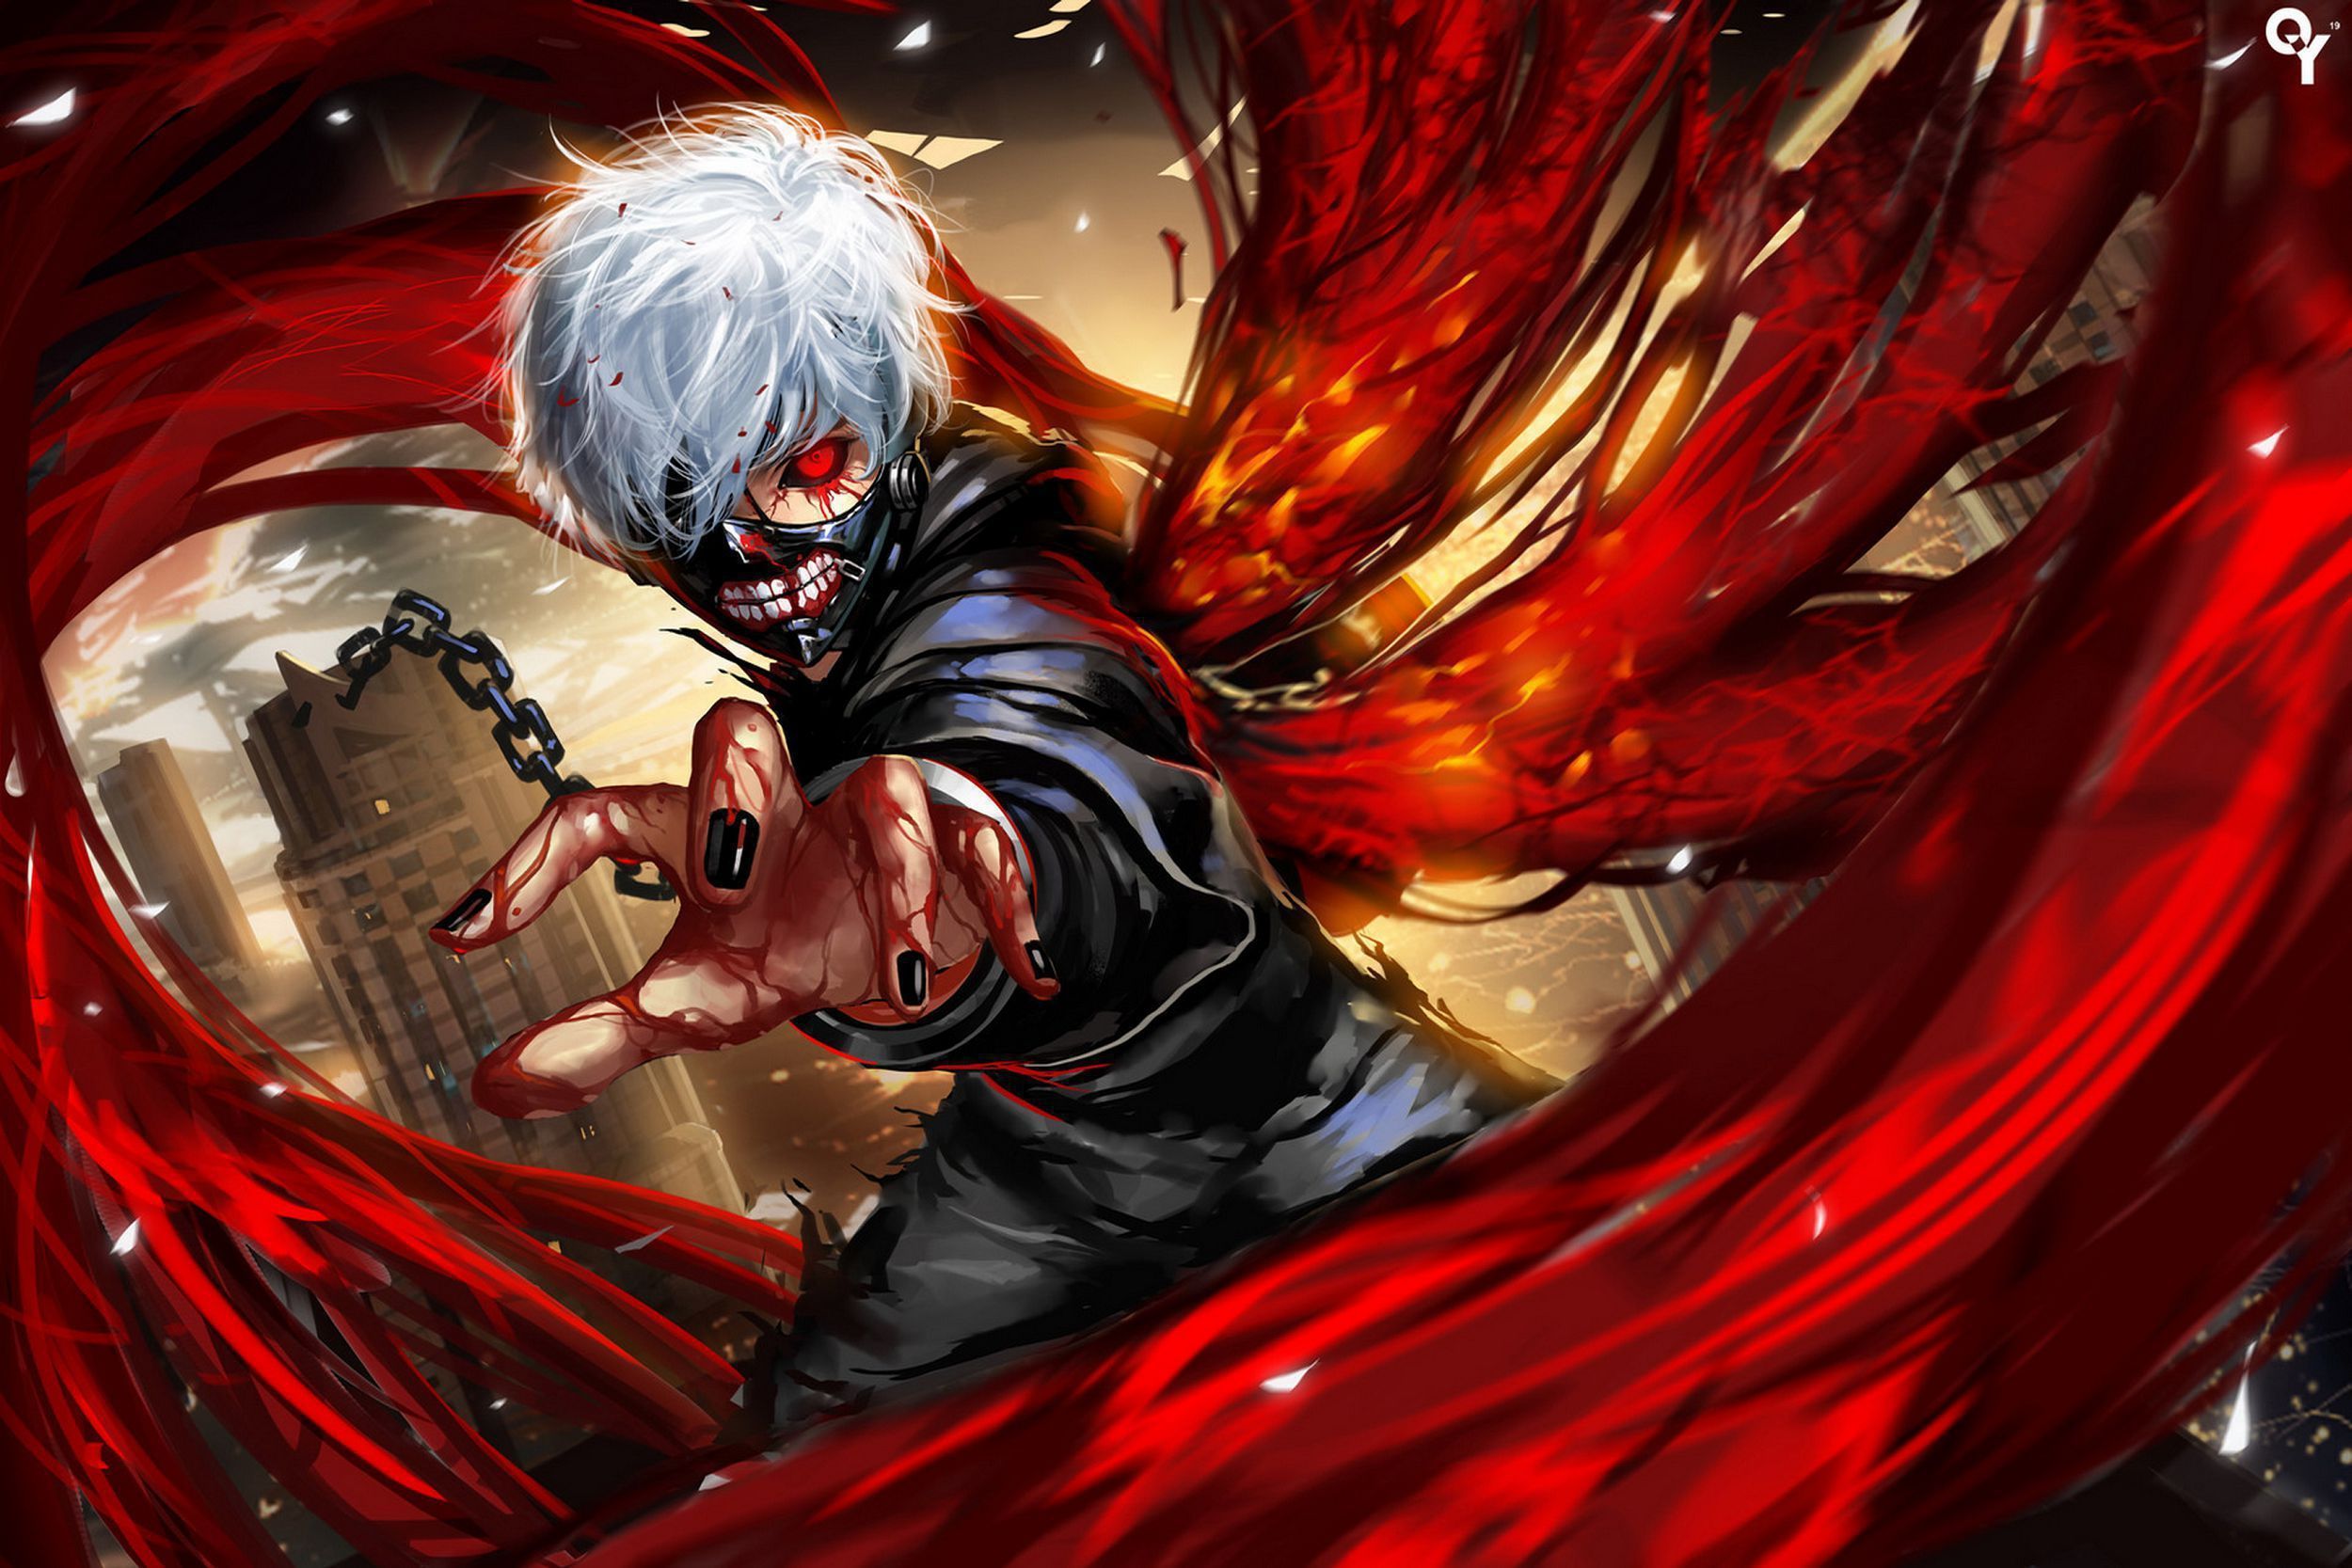 Anime Laptop Wallpapers, HD Anime 1366x768 Backgrounds, Free Images Download